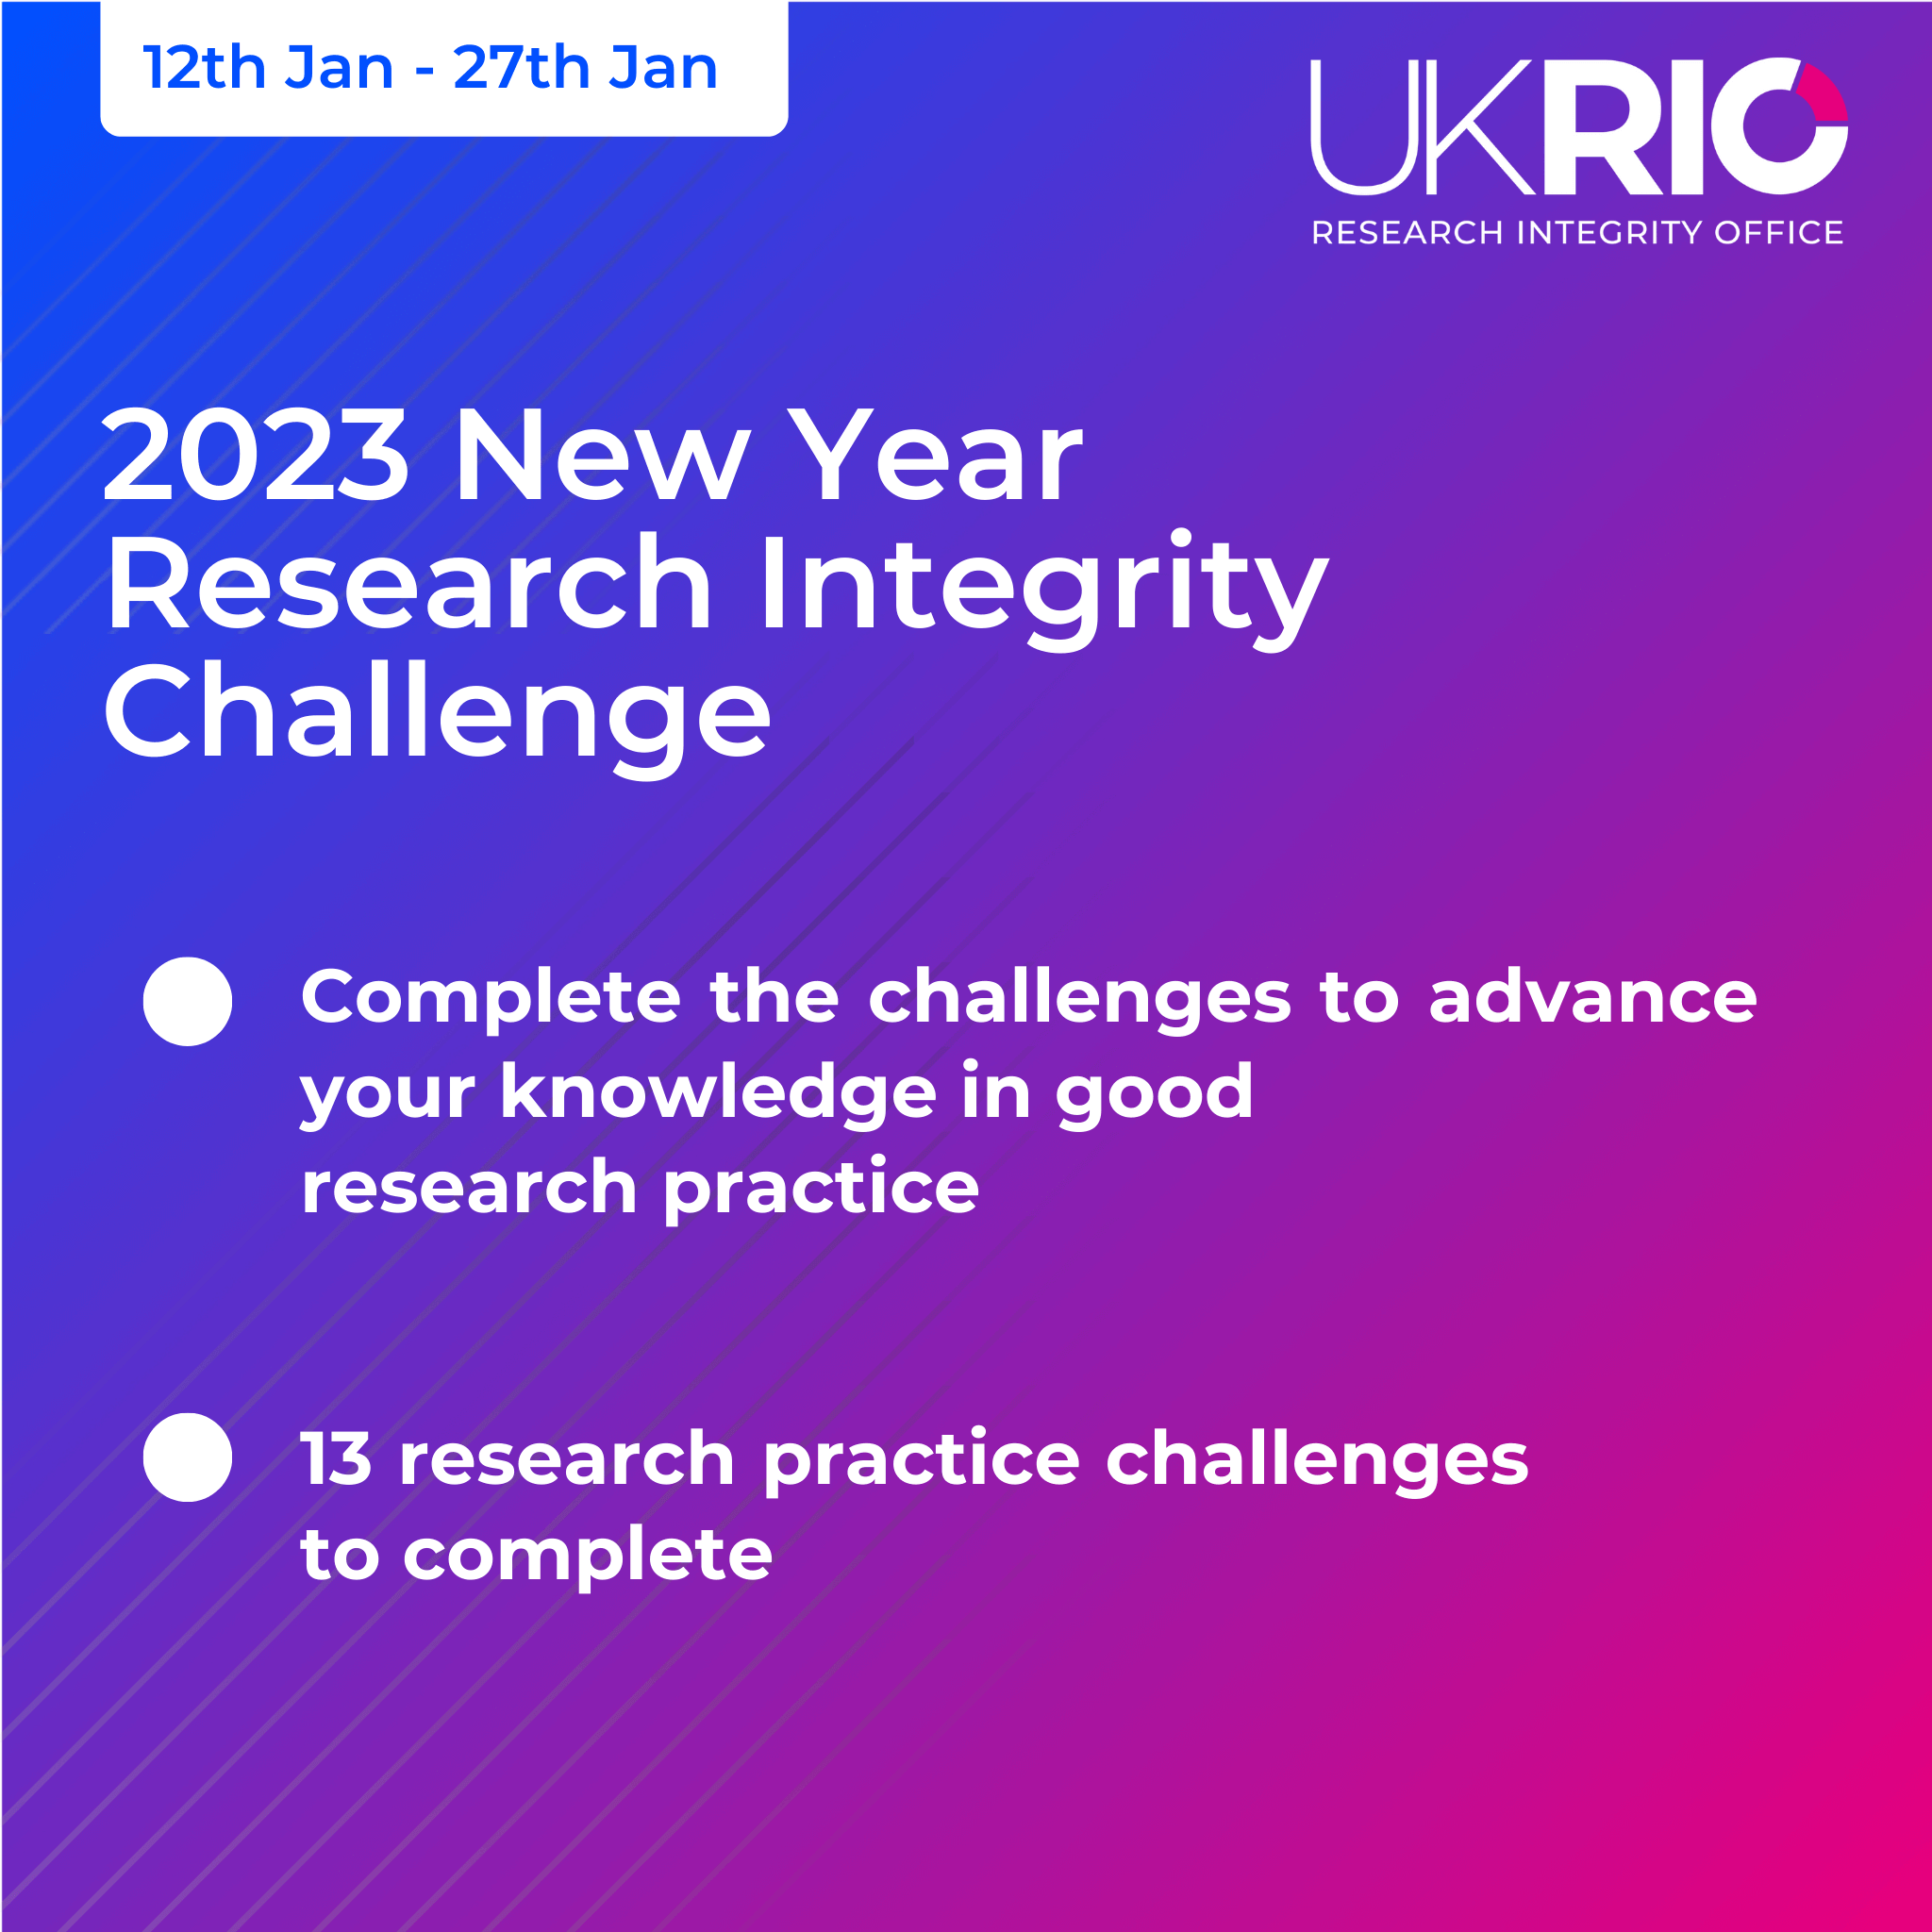 12th Jan - 27th Jan, 2023 New Year Research Integrity Challenge. Complete the challenges to advance your knowledge in good research practice. 13 research practice challenges to complete.